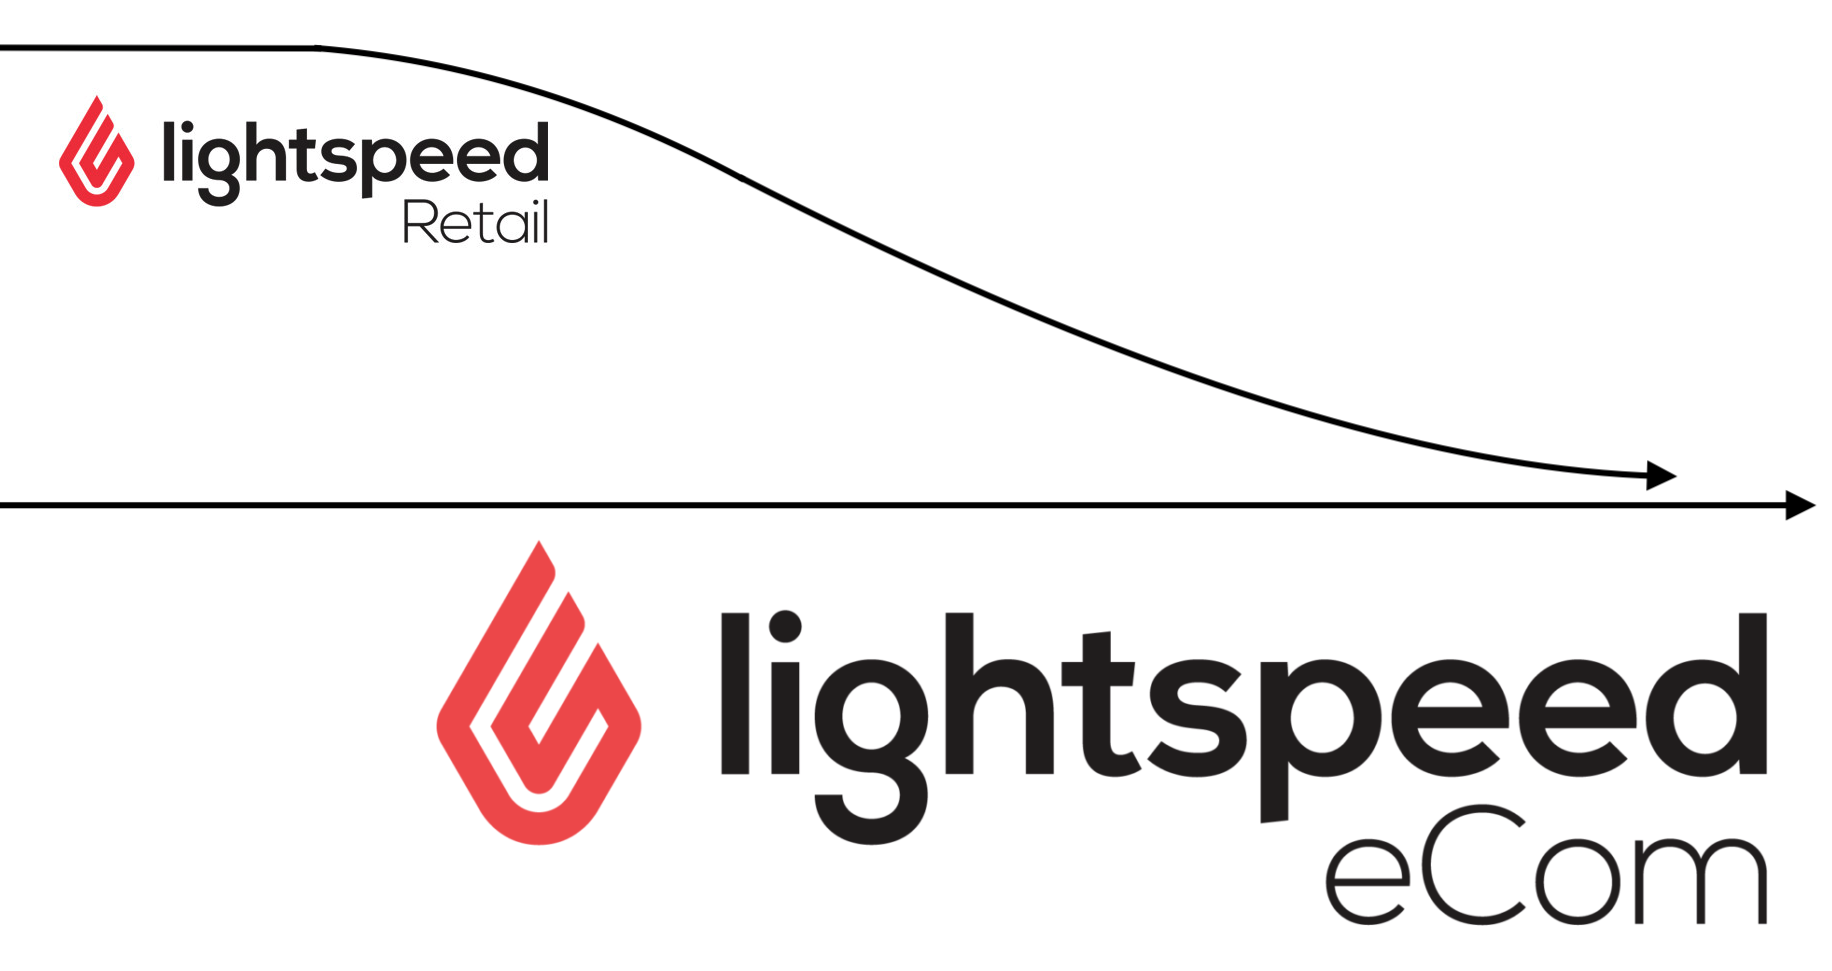 Shows both the Lightspeed Retail and eCom logos representing arrows. The Retail arrow is merging with the eCom one.